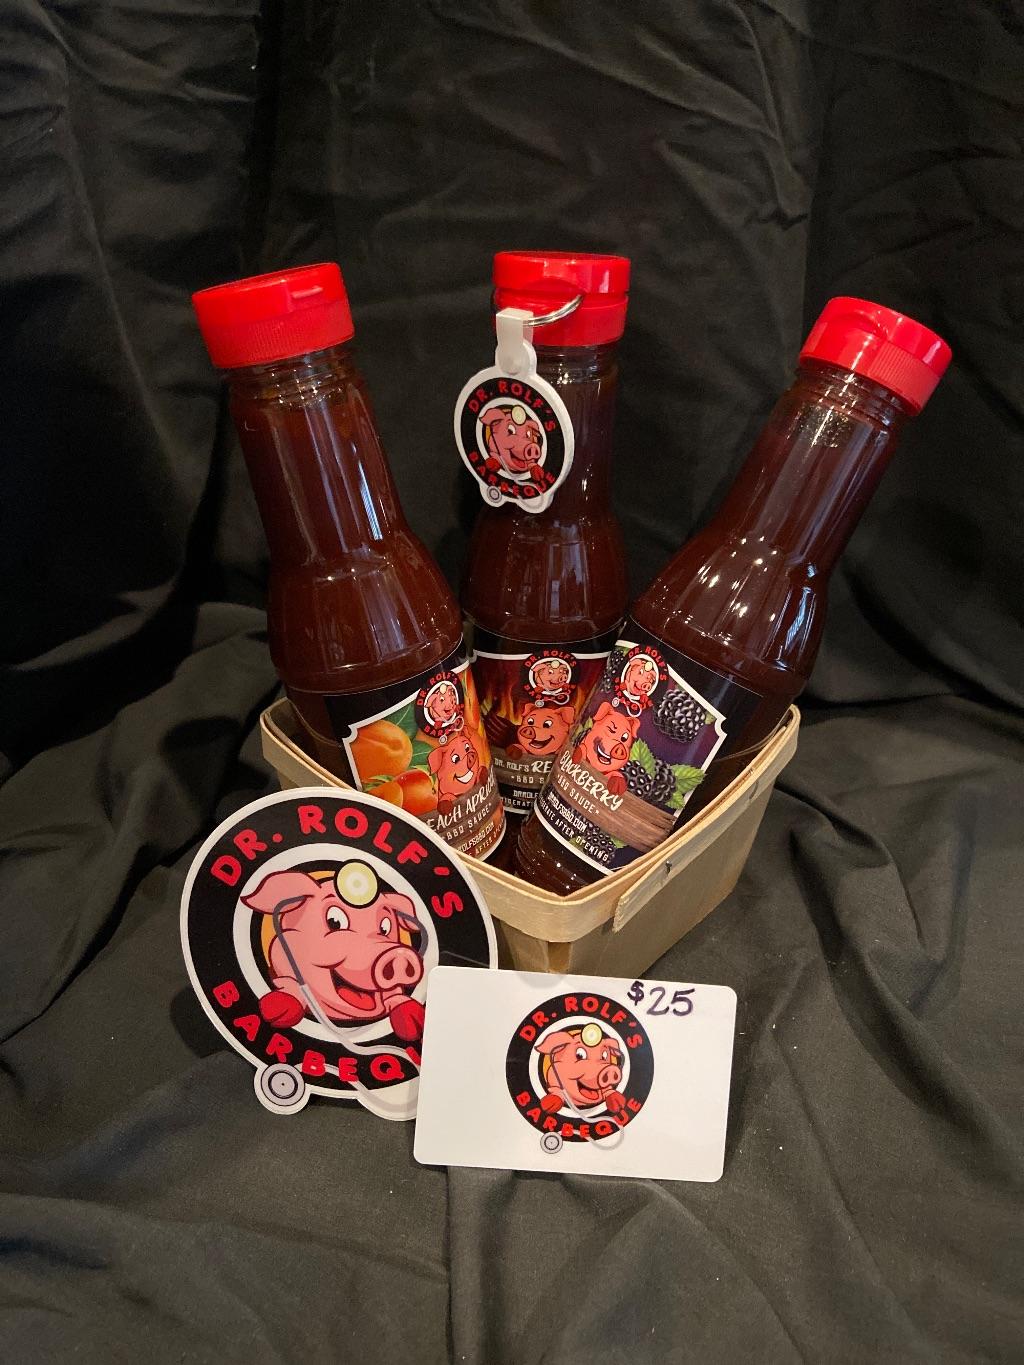 Dr. Rolf's $25 Gift Card + Sauces